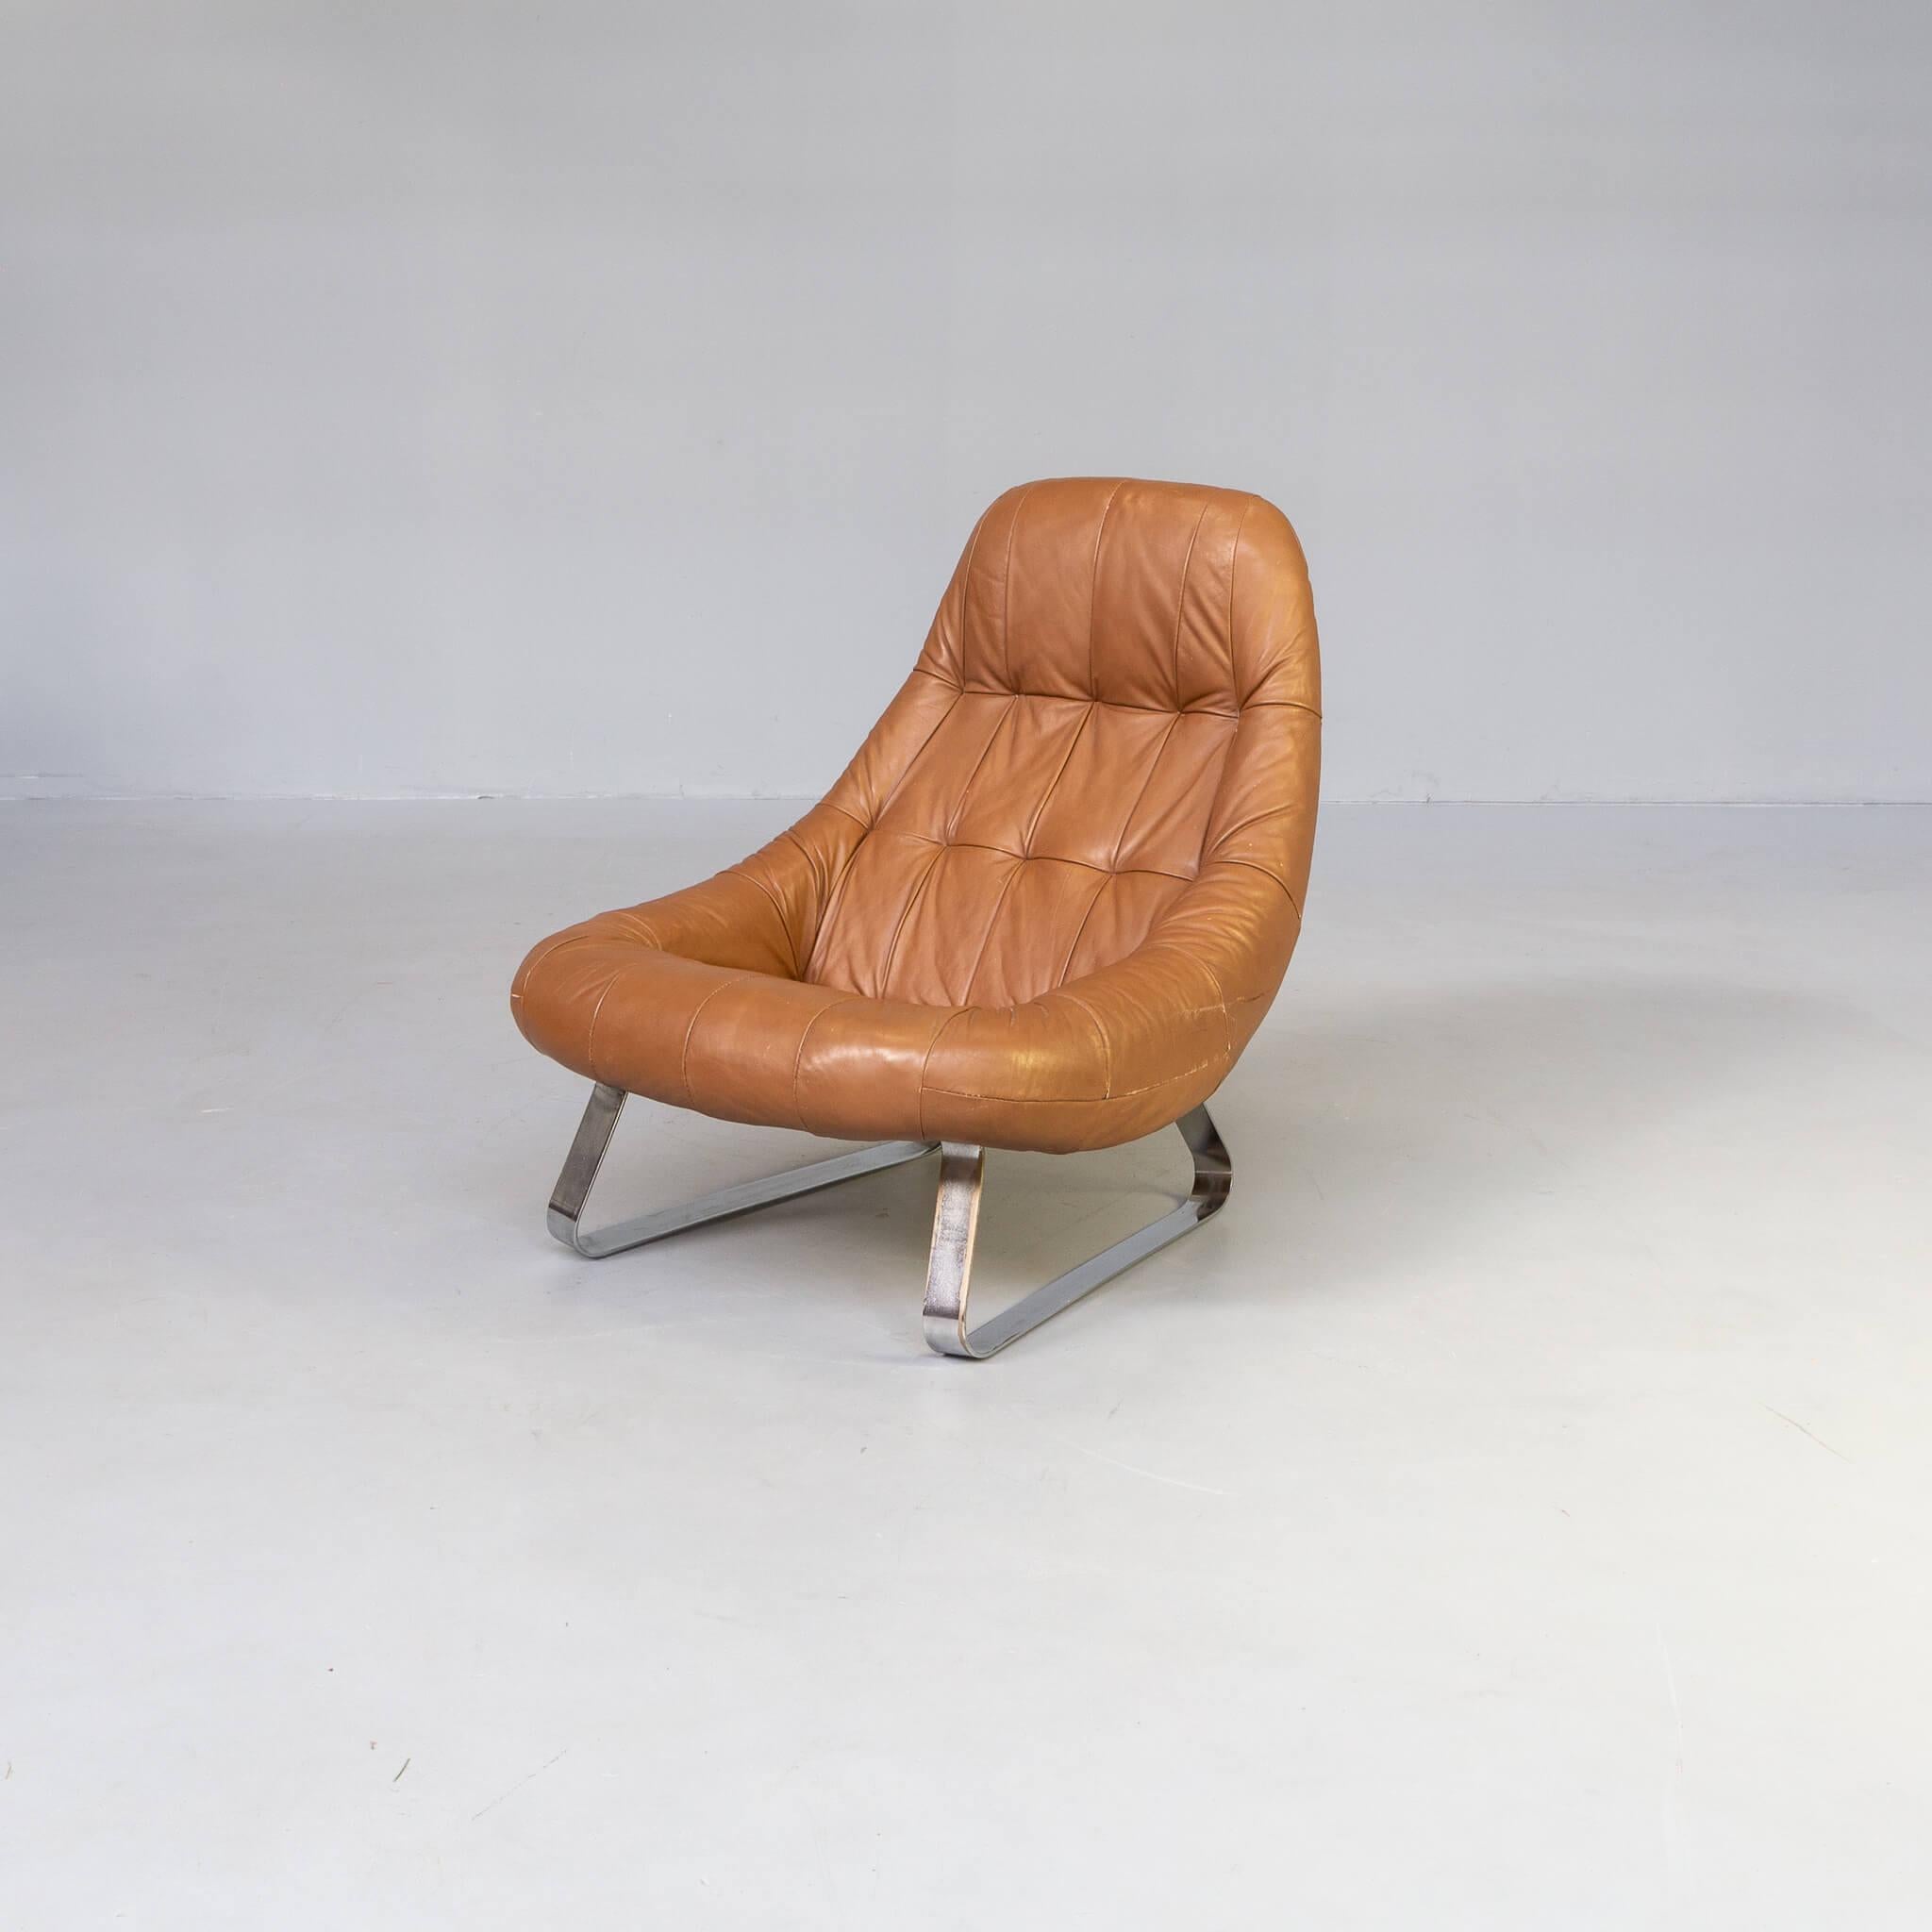 Brazilian 70s Percival Lafer “Earth Chair” Collection Lounge Fauteuil and Hocker For Sale